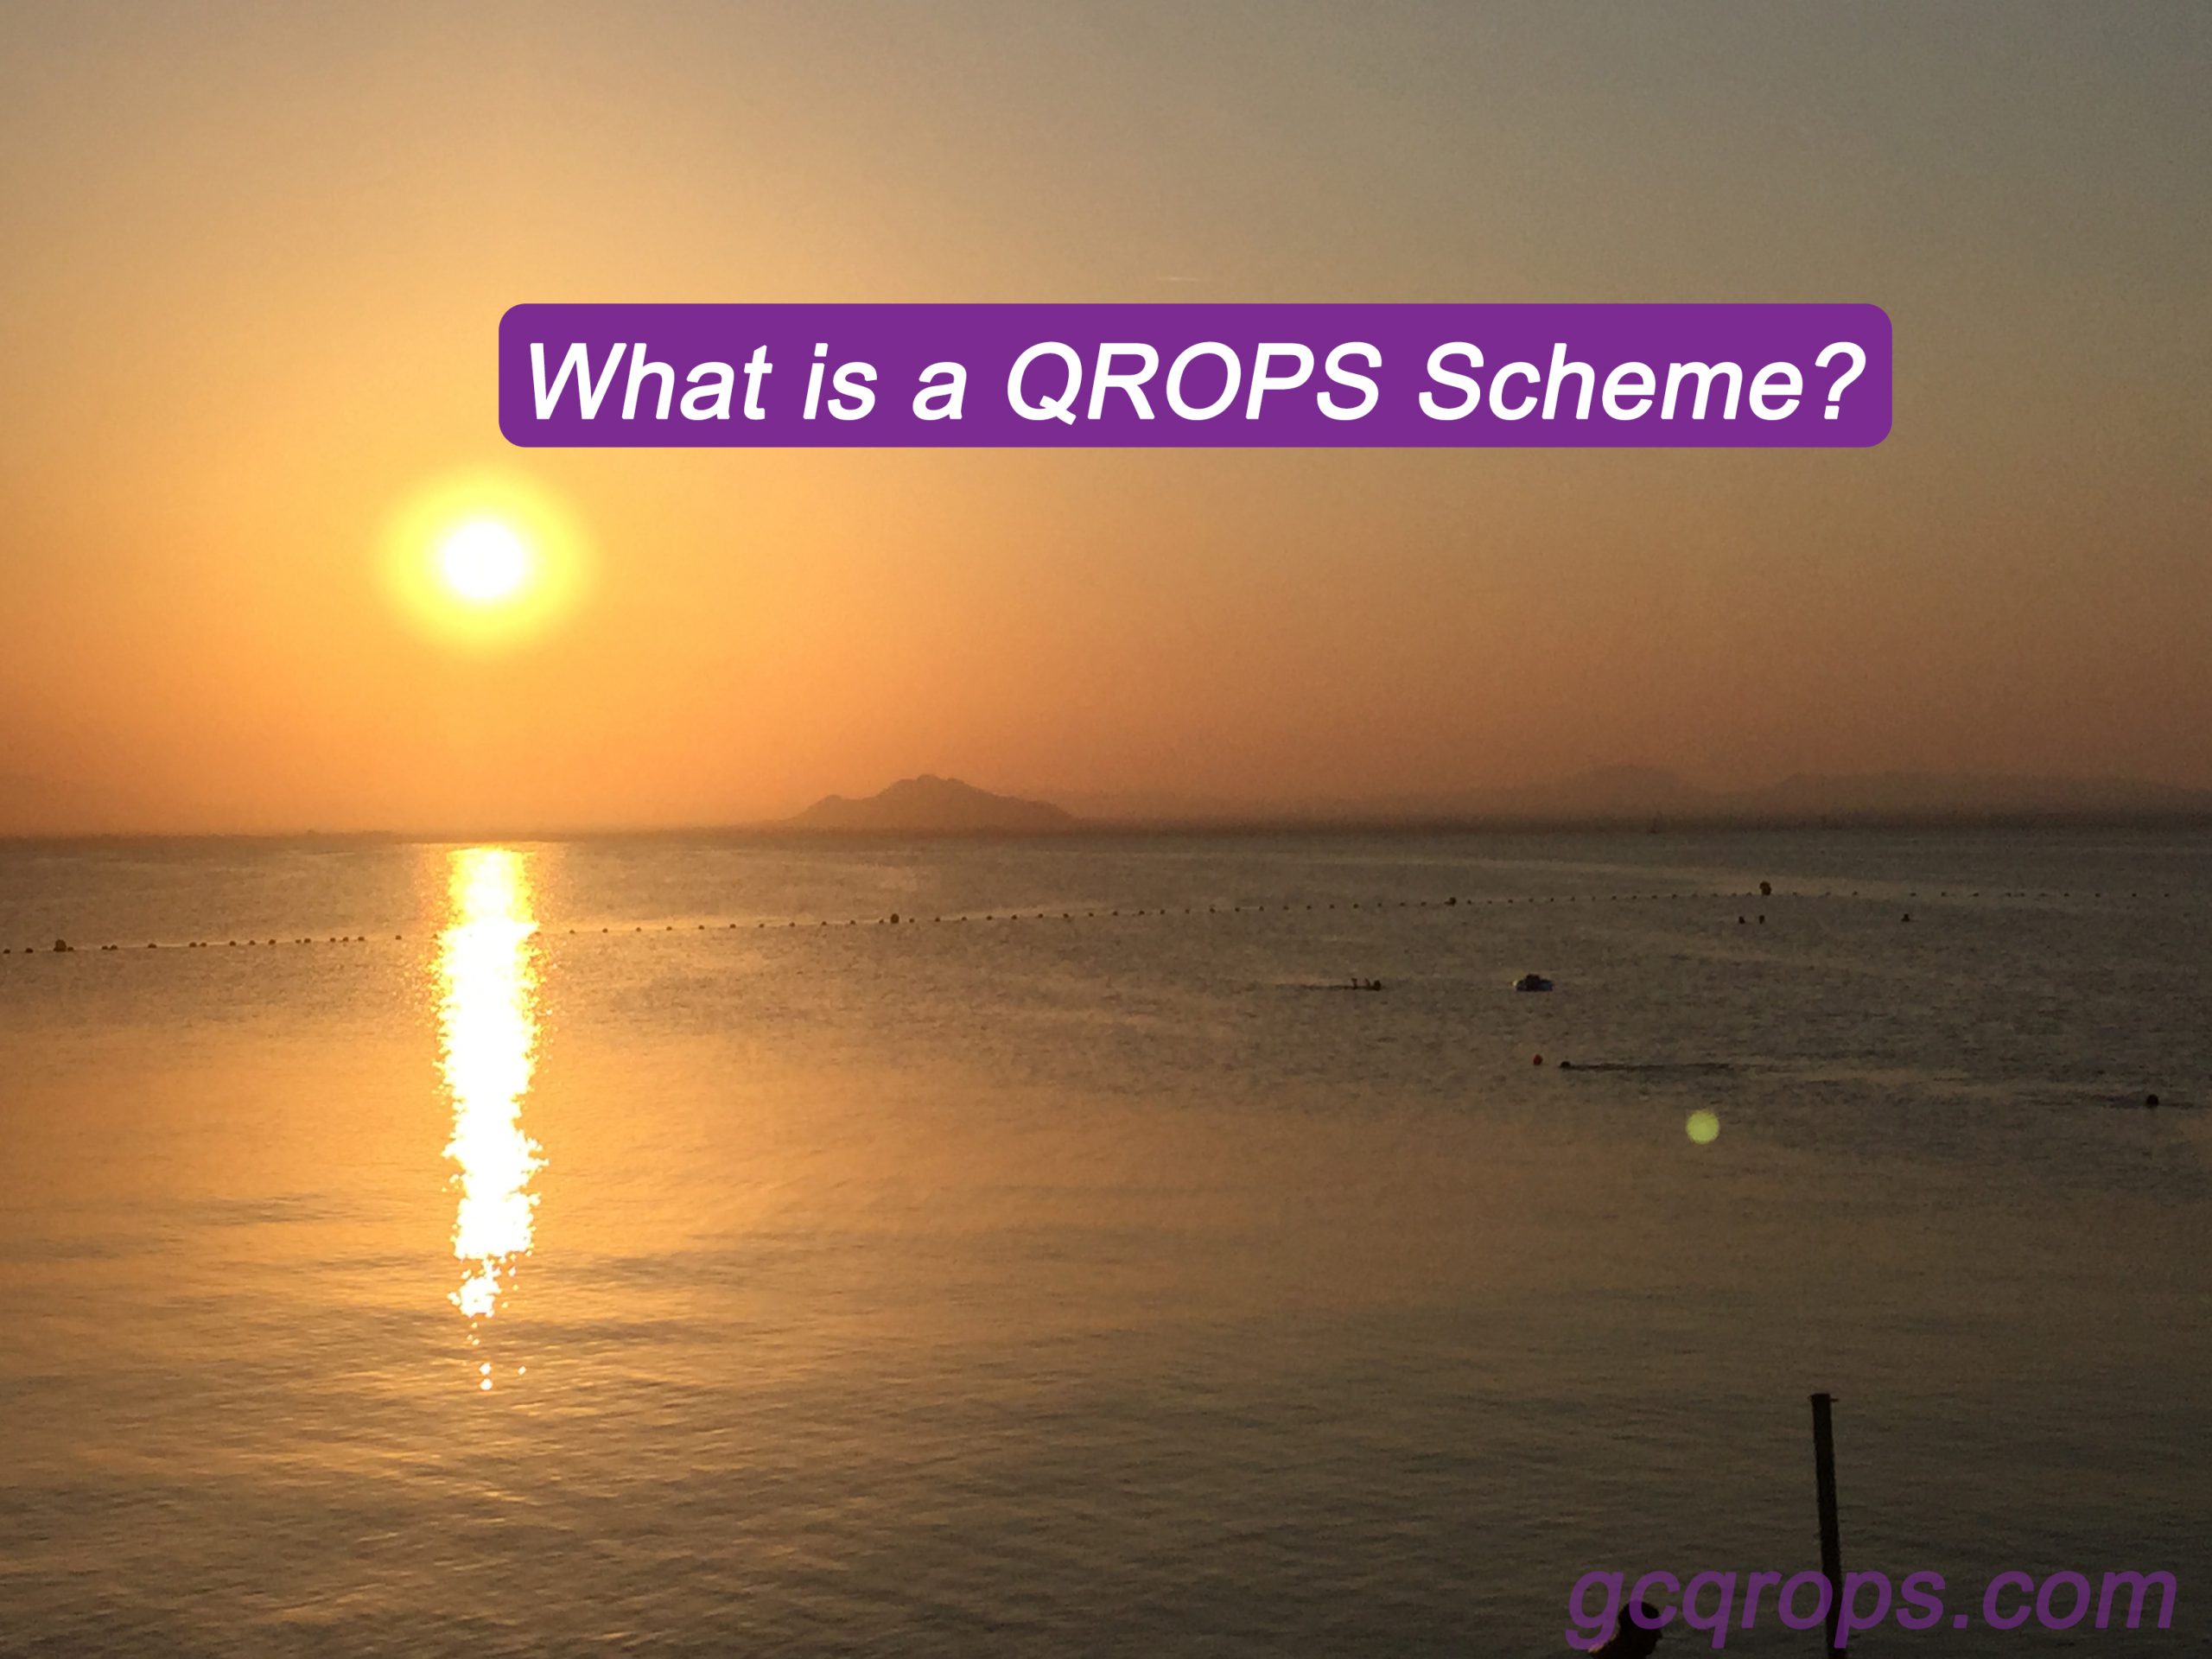 what is a qrops scheme?